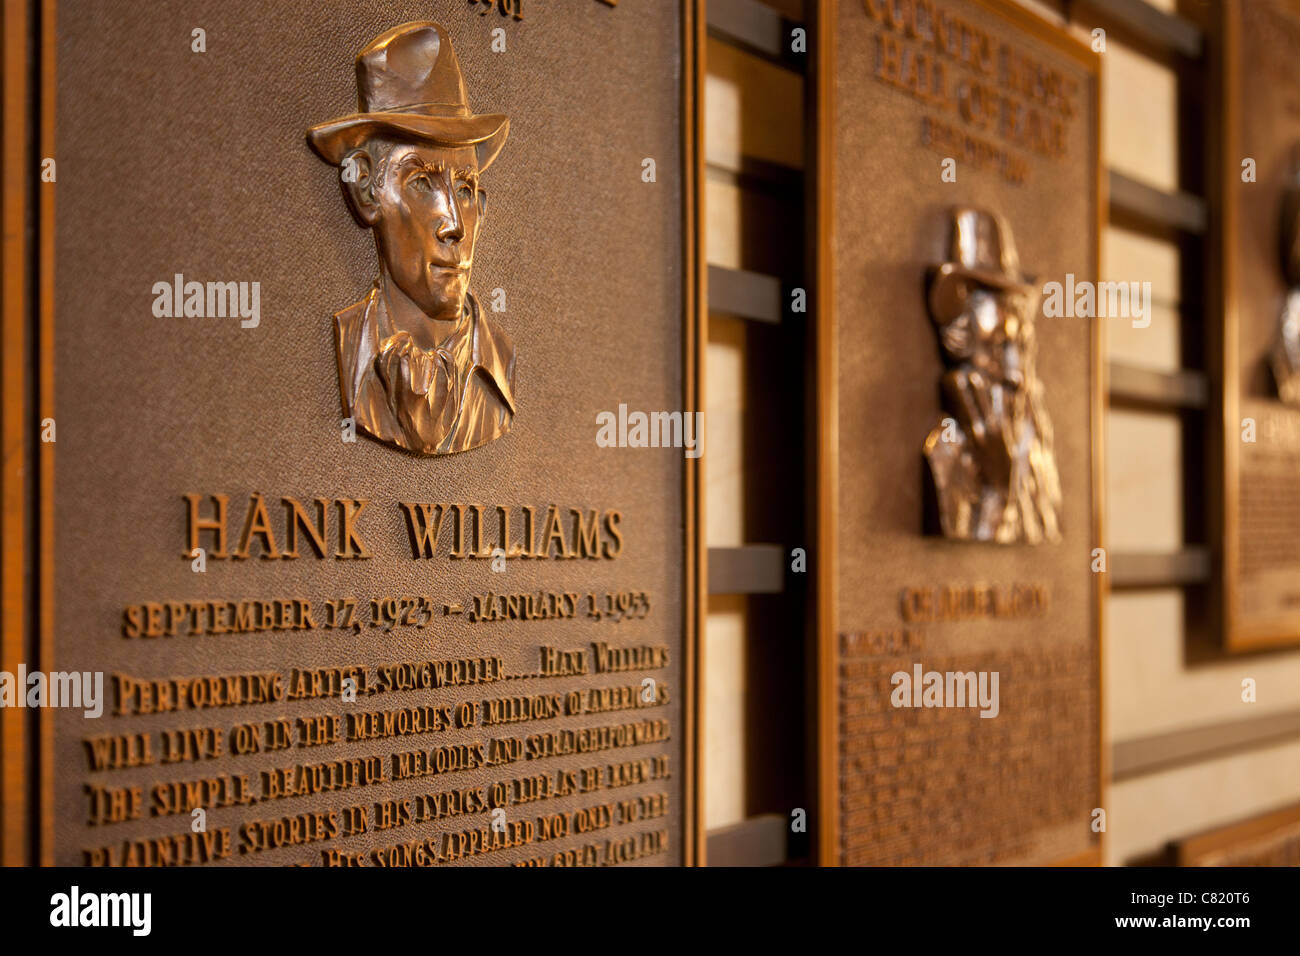 Hank Williams Plaque at the Country Music Hall of Fame, Nashville Tennessee  USA Stock Photo - Alamy